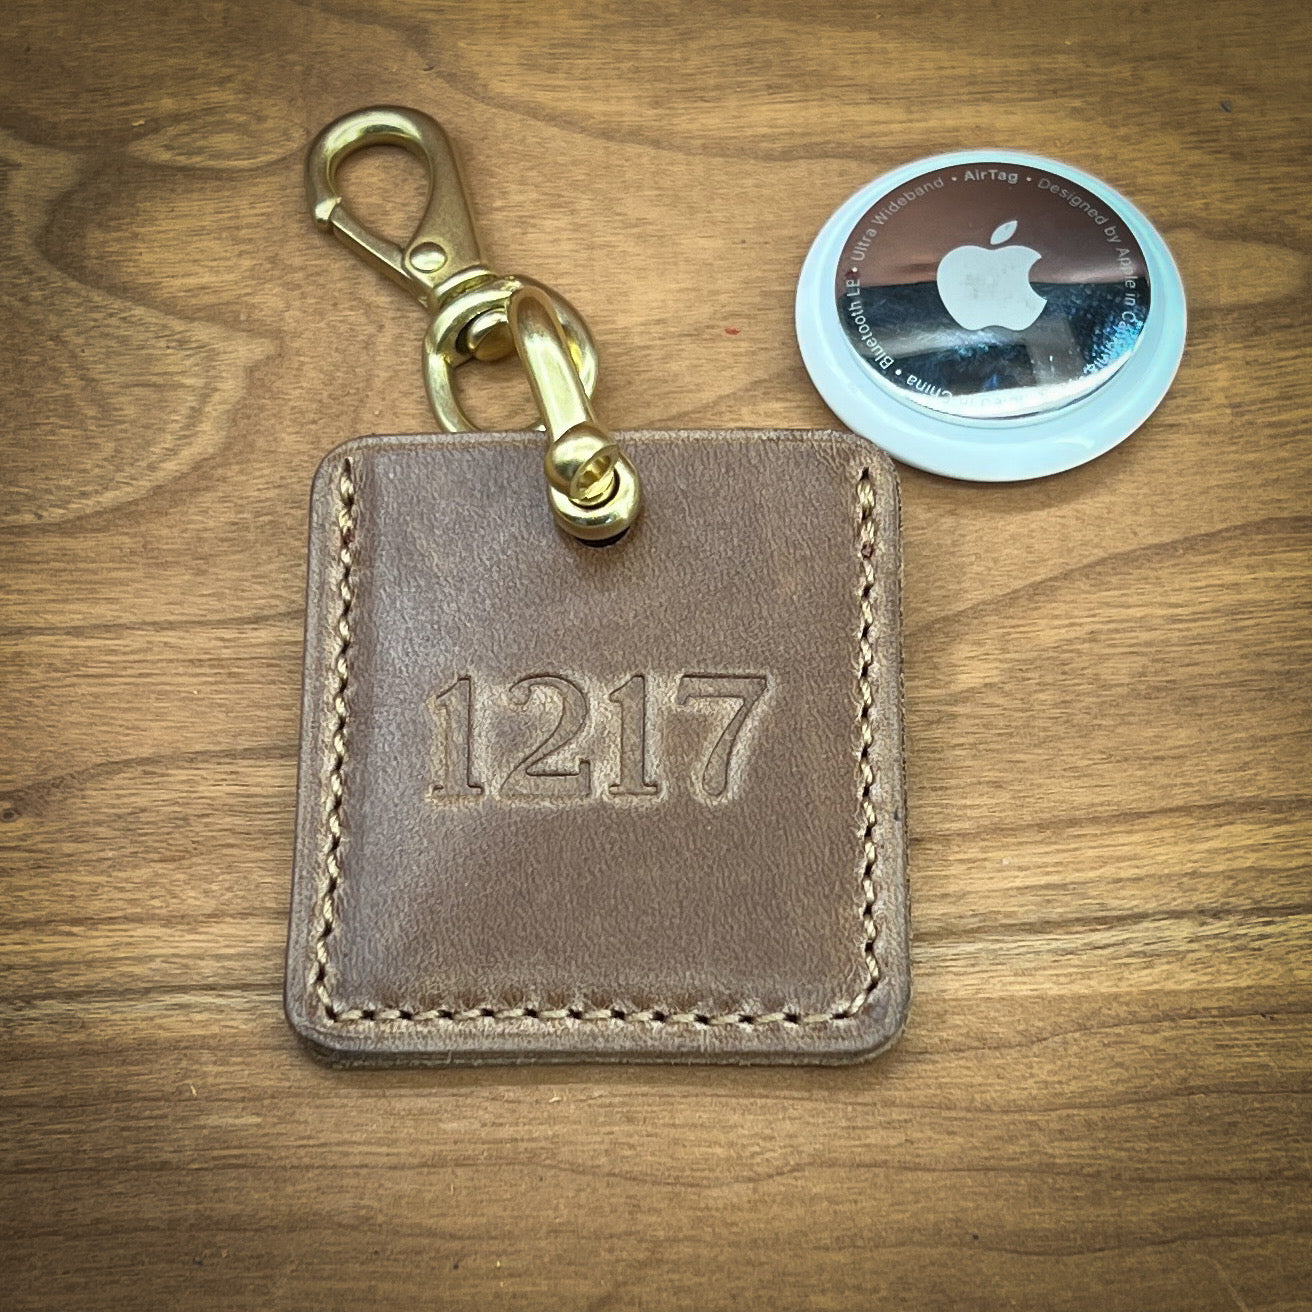 Customizable Airtag Holder in Horween leather | Handmade to Order